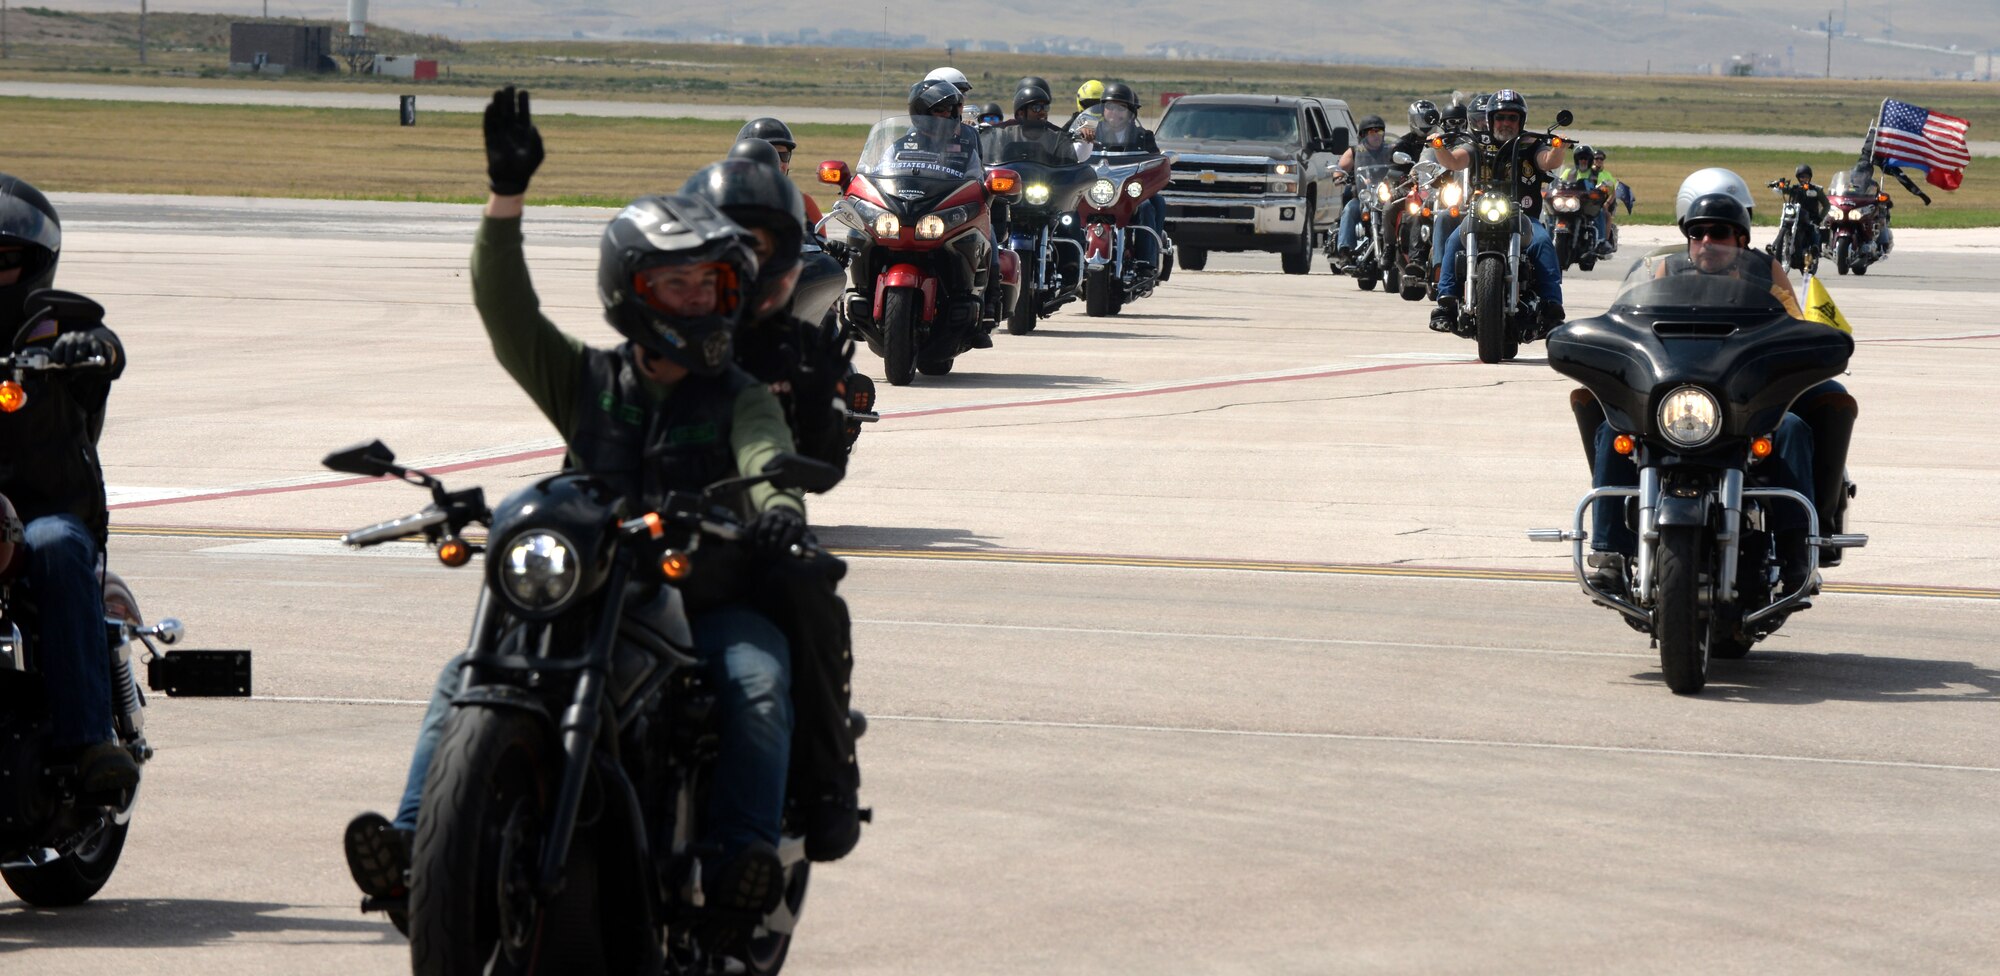 Motorcyclists begin the Dakota Thunder Run and exit the runway Aug 8, 2017 on Ellsworth Air Force Base, S.D. The ride started Ellsworth and ended at the Sturgis Veterans Appreciation Ceremony with stops in Nemo and Vanocher Canyon. (U.S. Air Force photo by Airman 1st Class Thomas Karol)